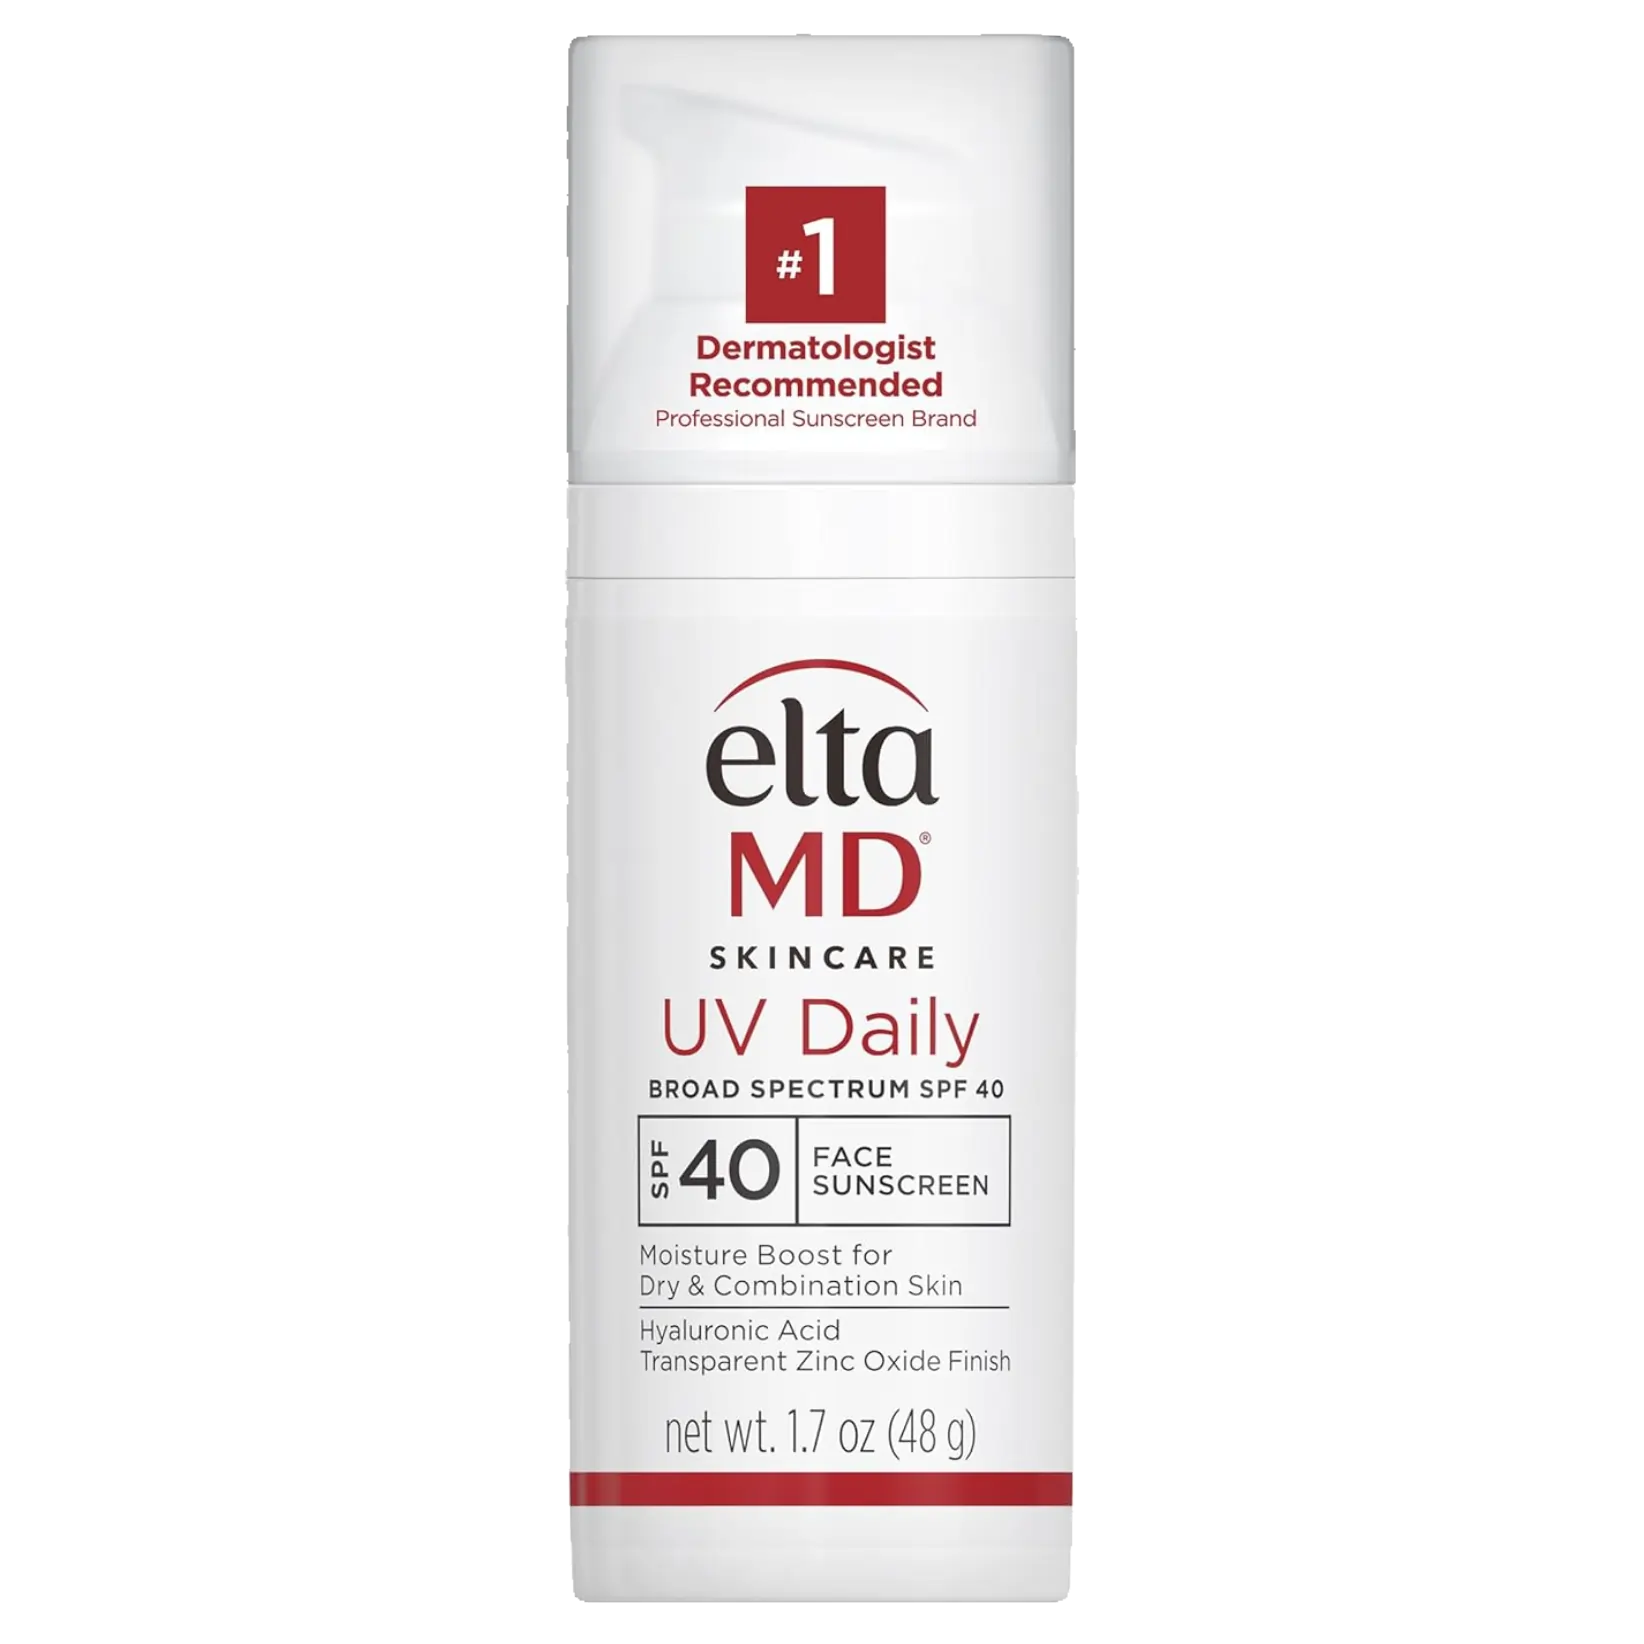 FEMMENORDIC's choice in the Elta MD UV Daily vs UV Clear sunscreen comparison, the Elta MD UV Daily Broad-Spectrum SPF 40